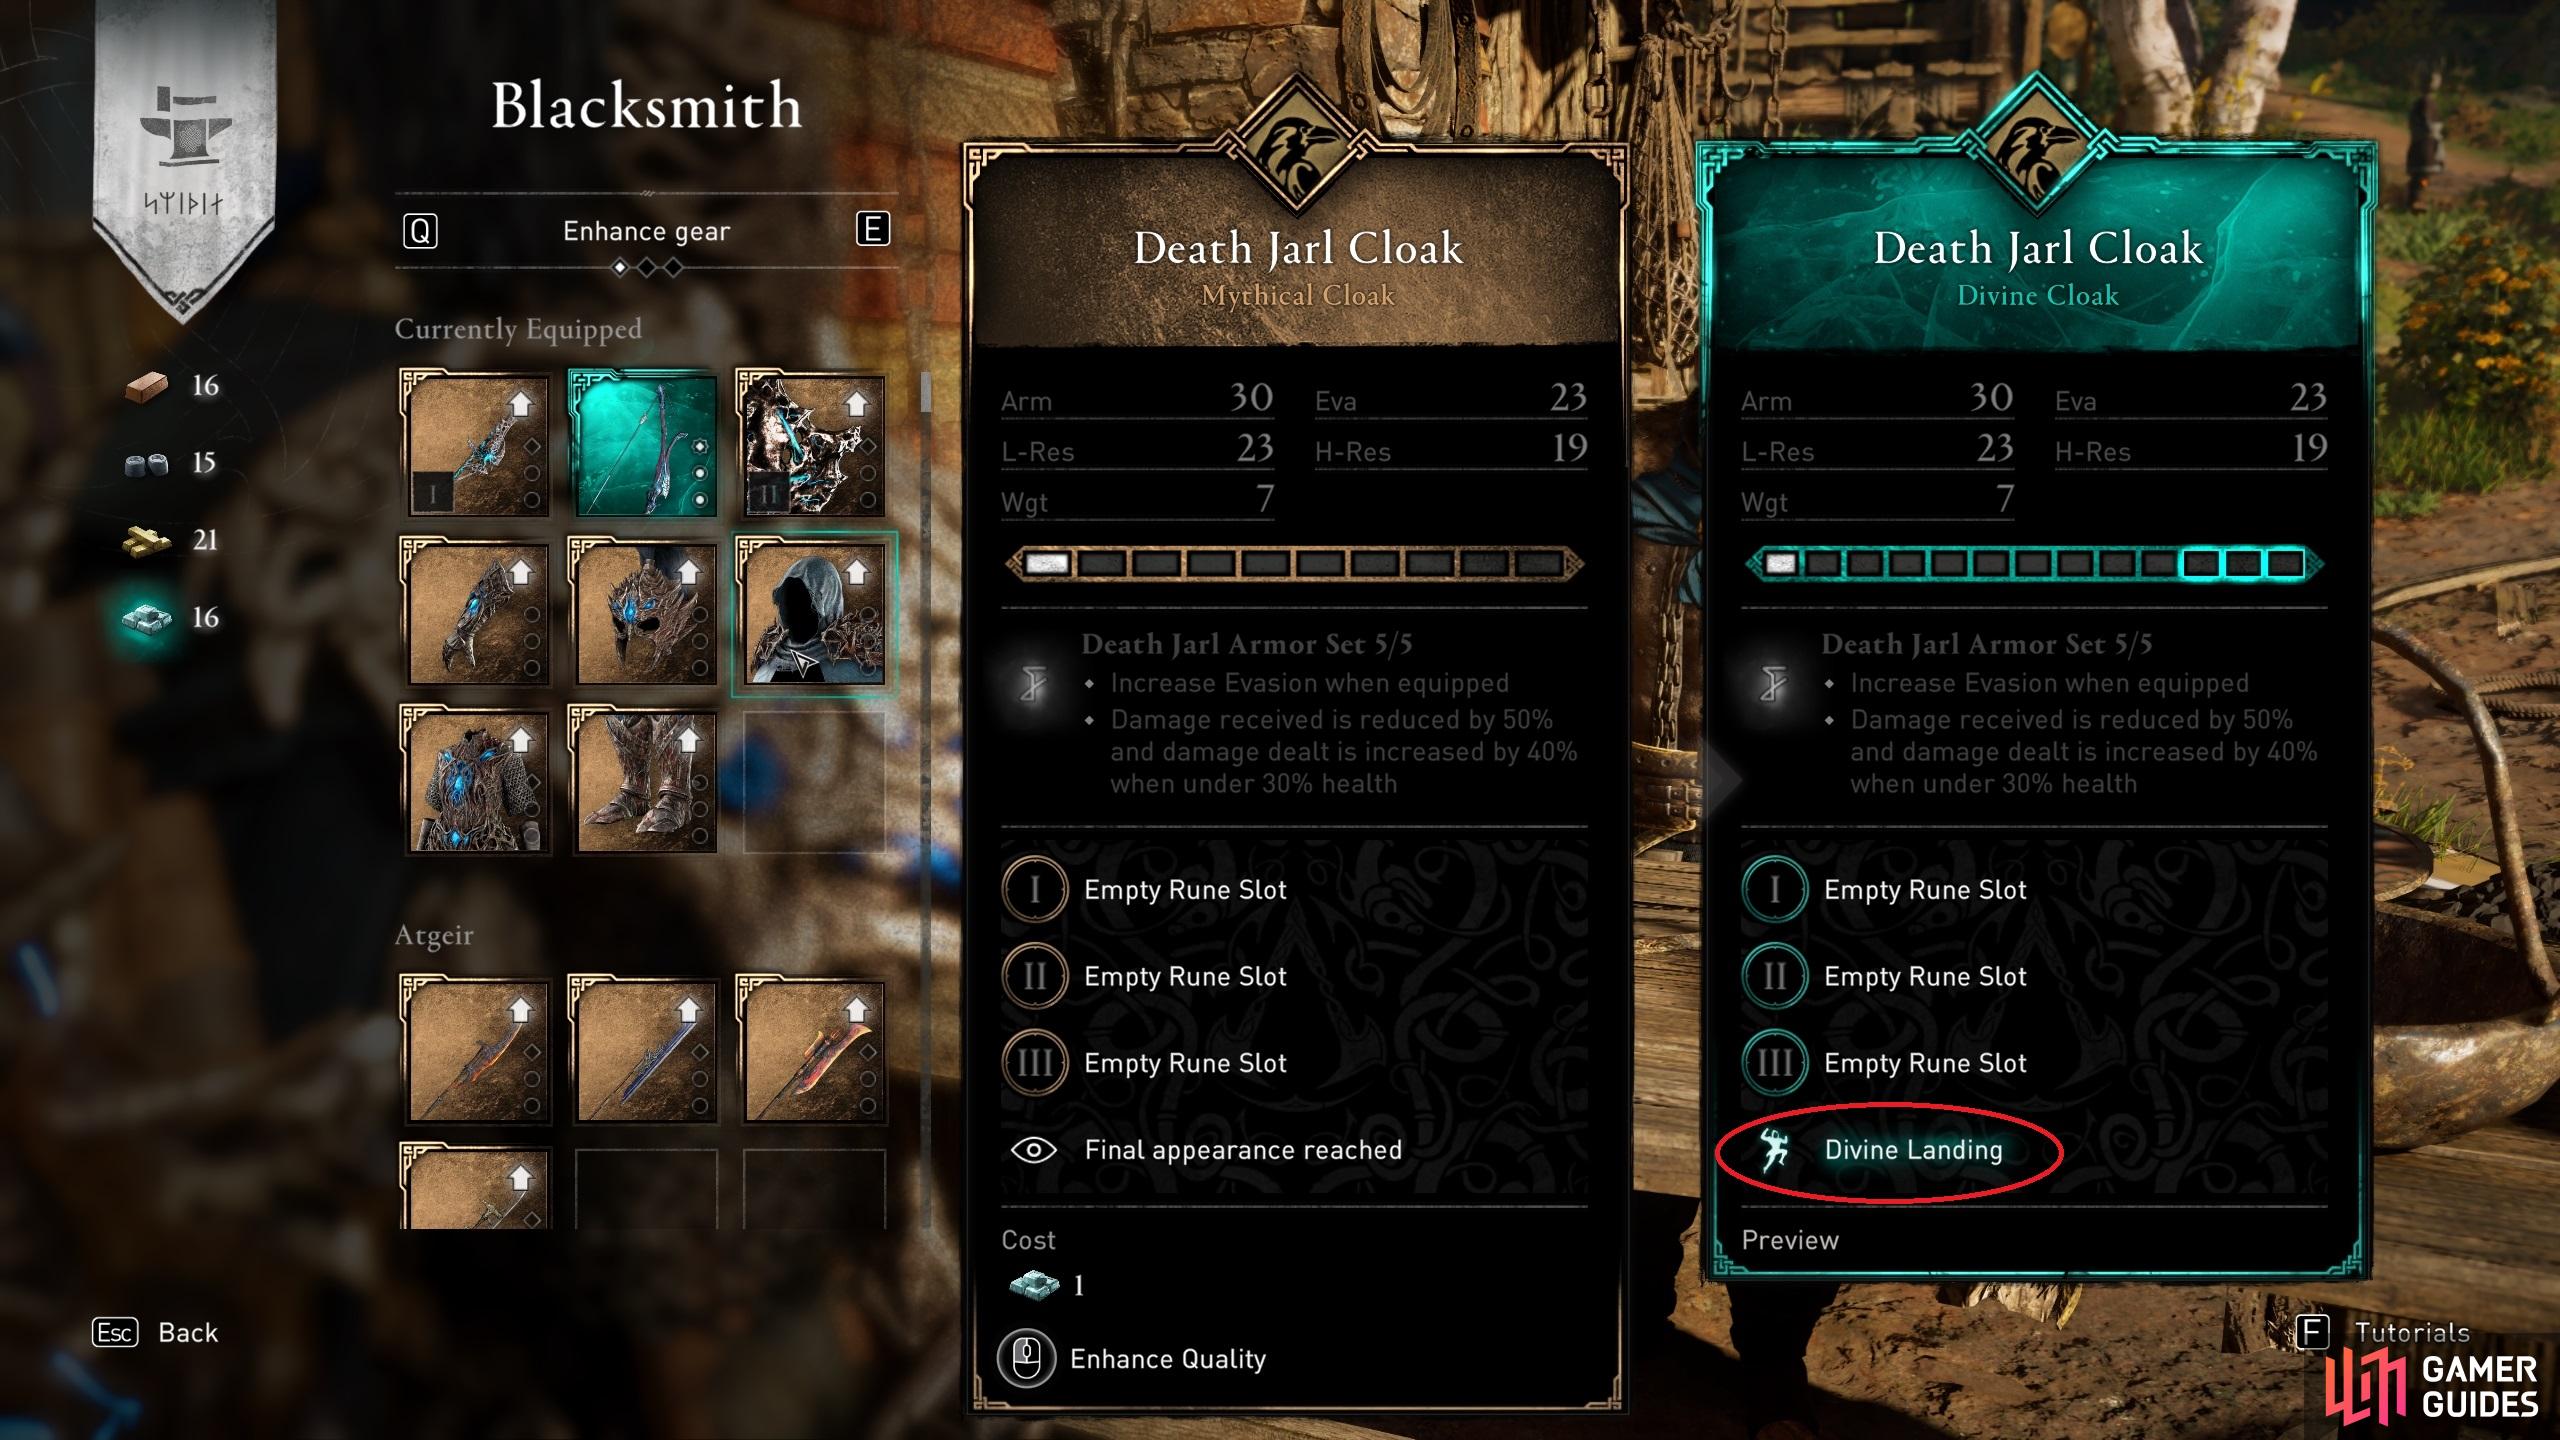 You can acquire the Divine Landing buff from the Death Jarl set if you upgrade it to Mythical.